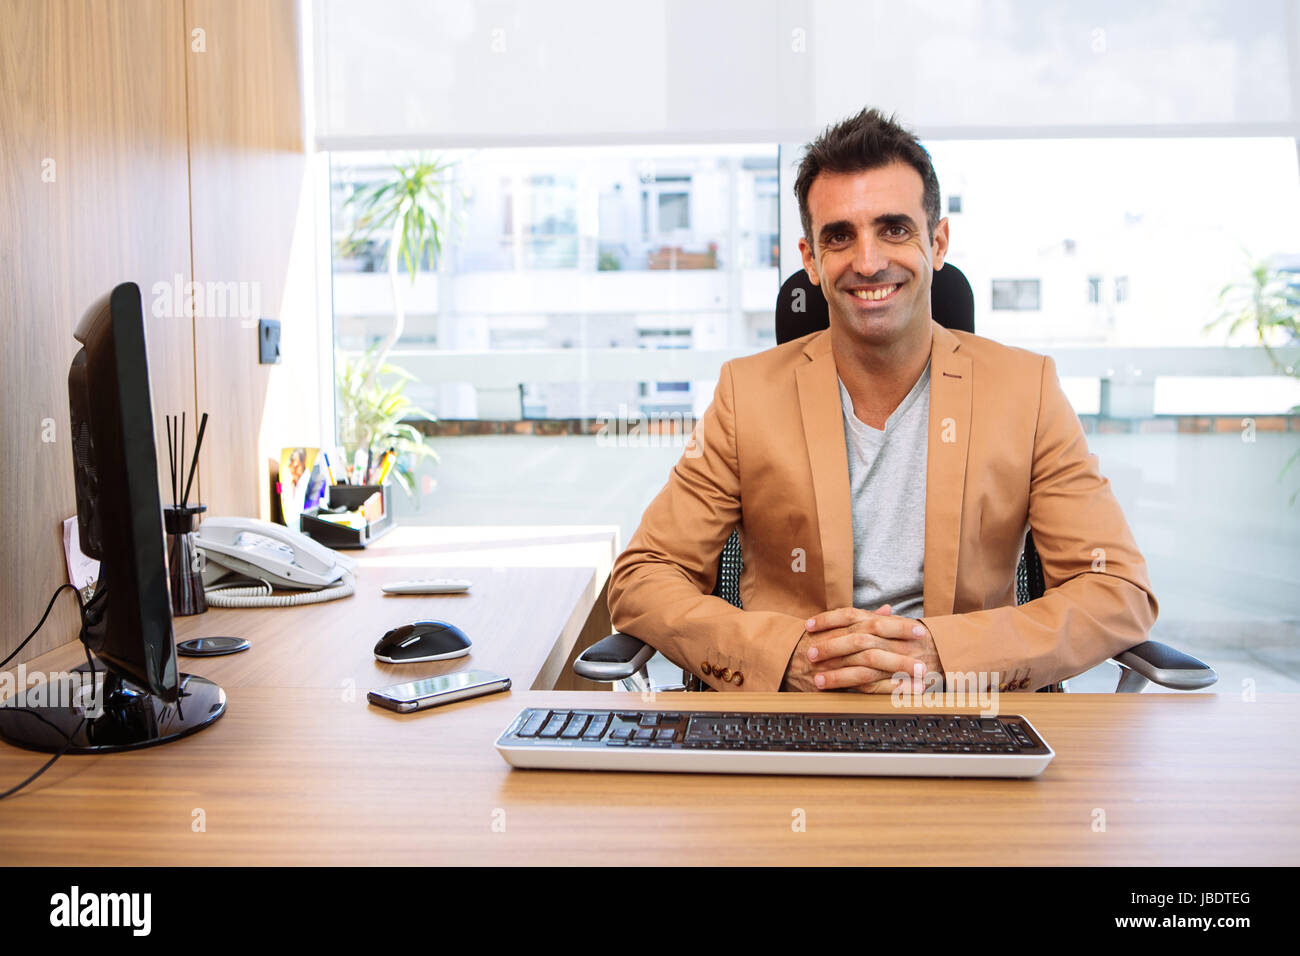 A 35 - 40 years man caucasian dark hair cool modern informal look smiling seating behind a desk in a work station in an office Stock Photo